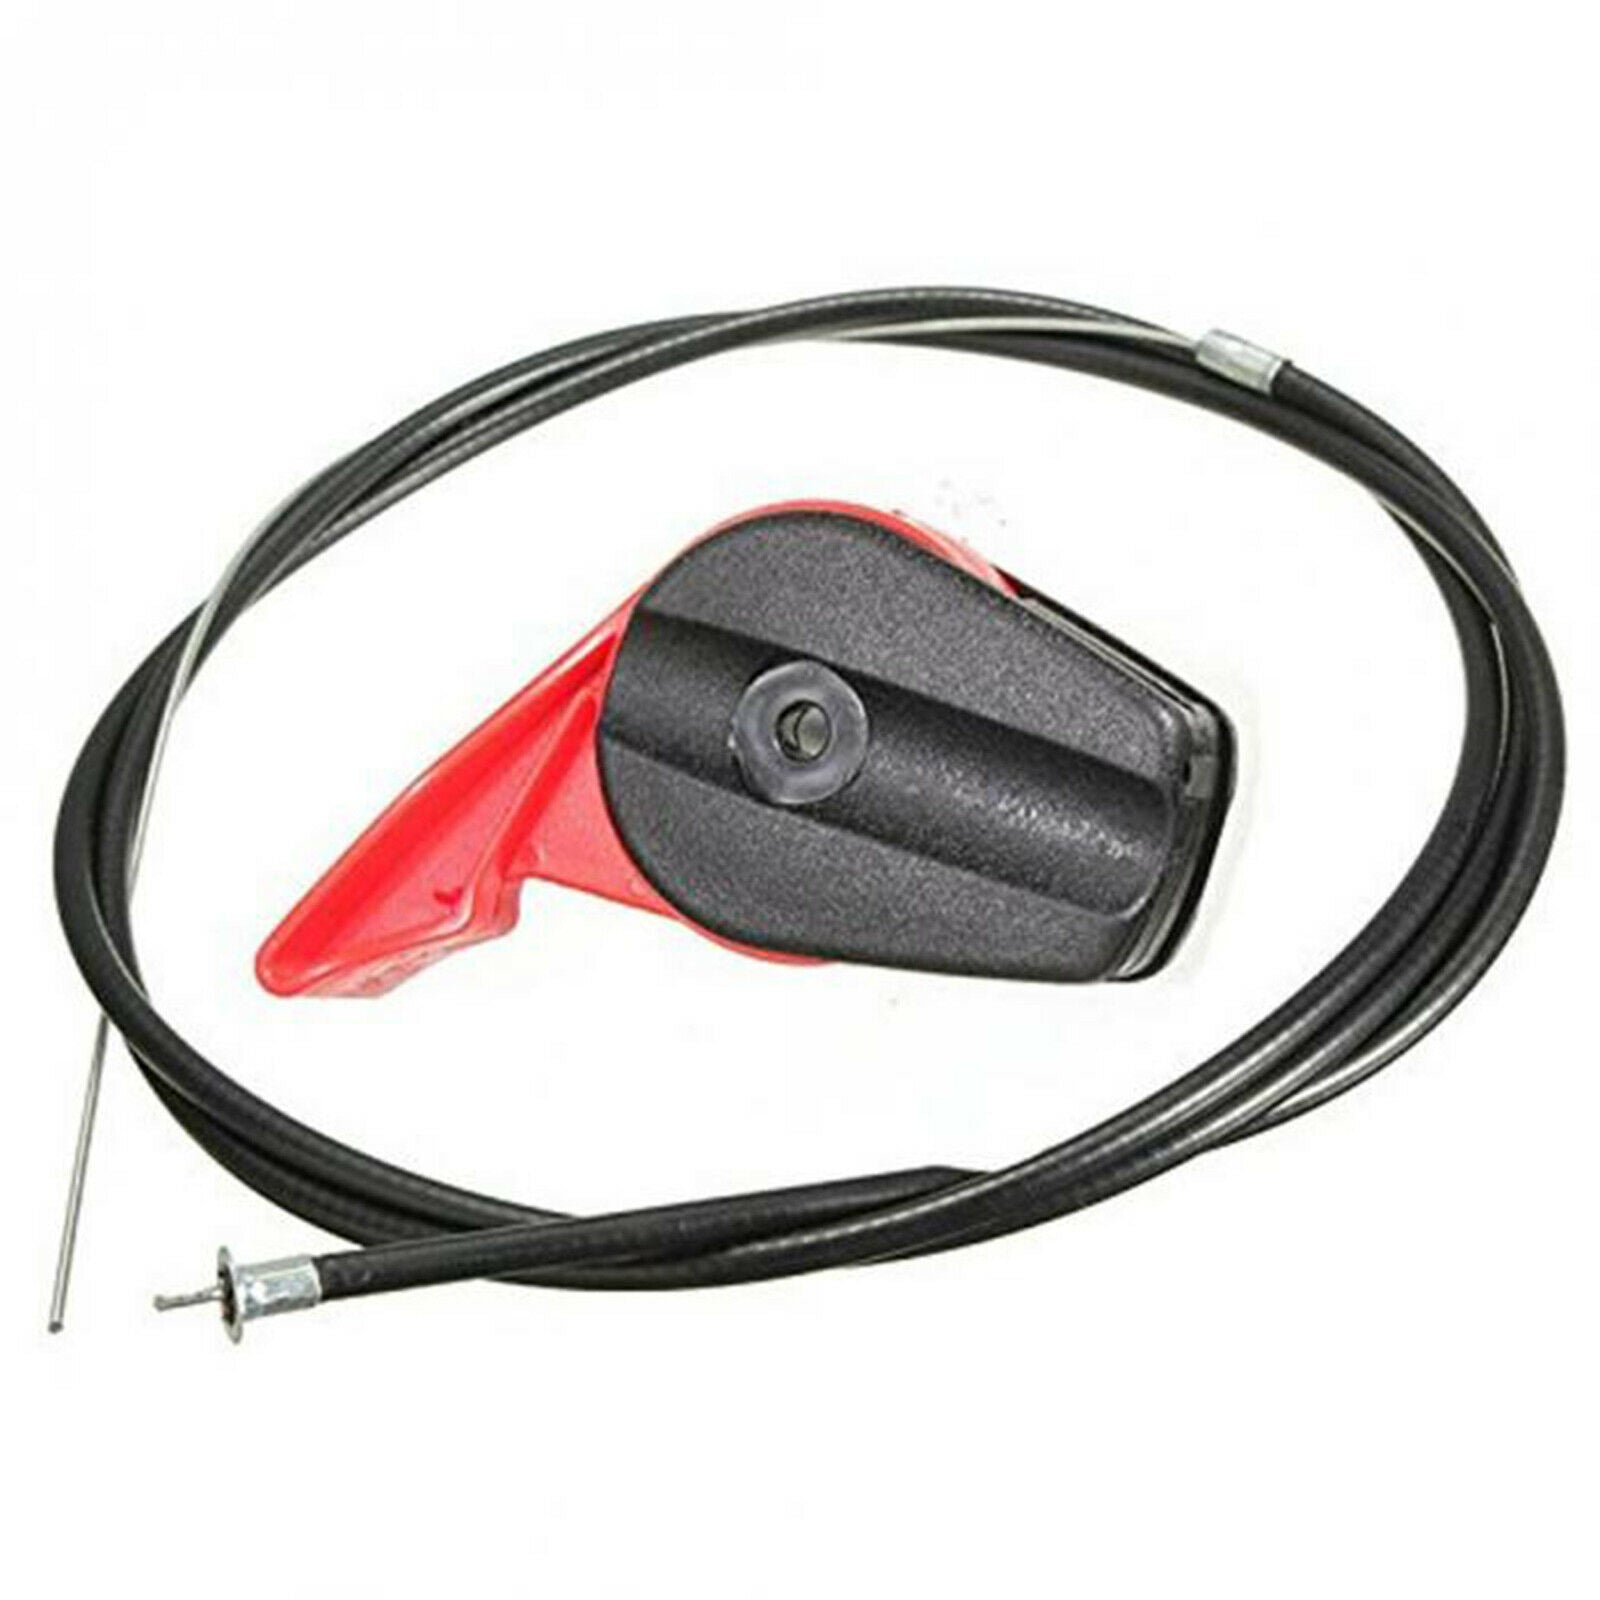 1.6m 63" Lawn Mower Throttle Cable Switch Lever Control Handle for Lawnmower